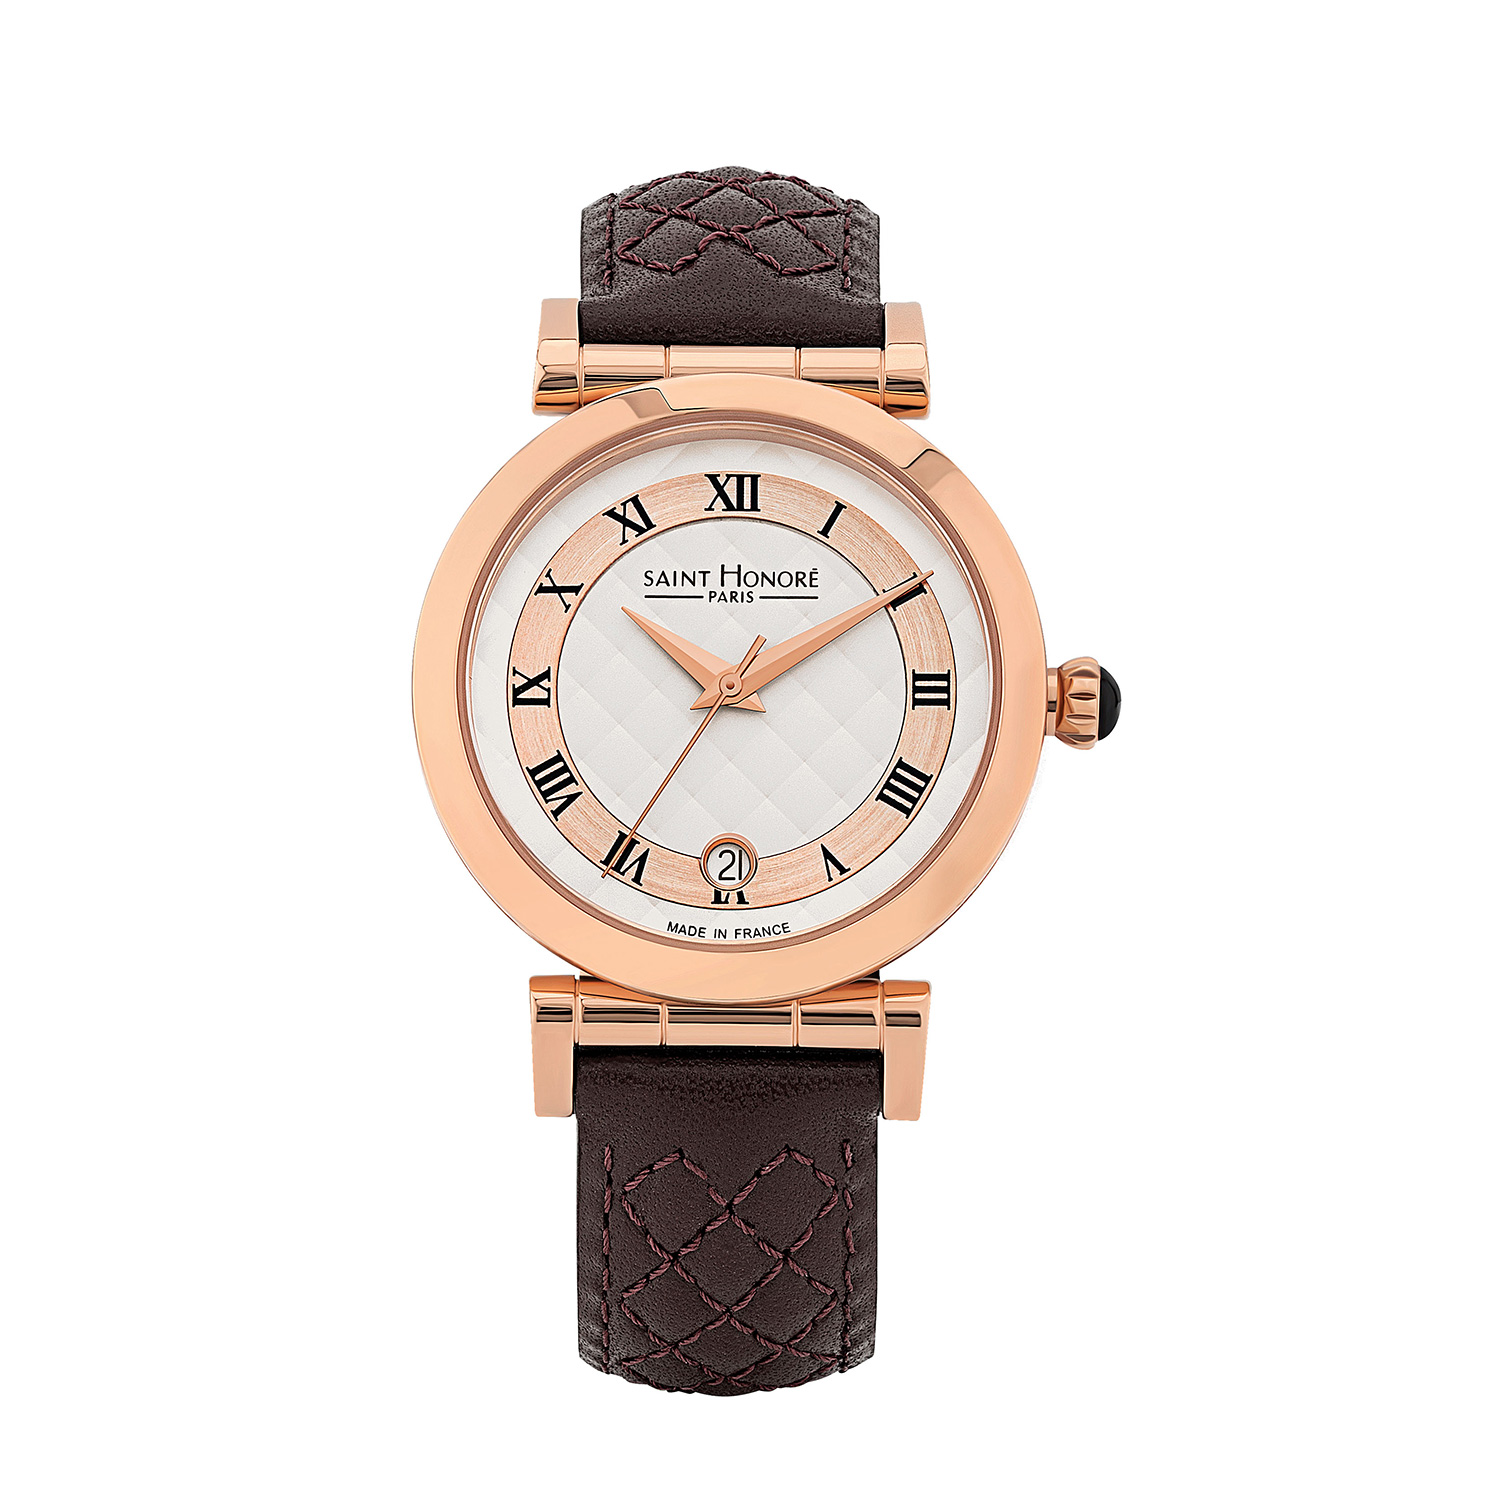 OPERA Women's watch - ion plating gold rose case, white dial, brown leather strap